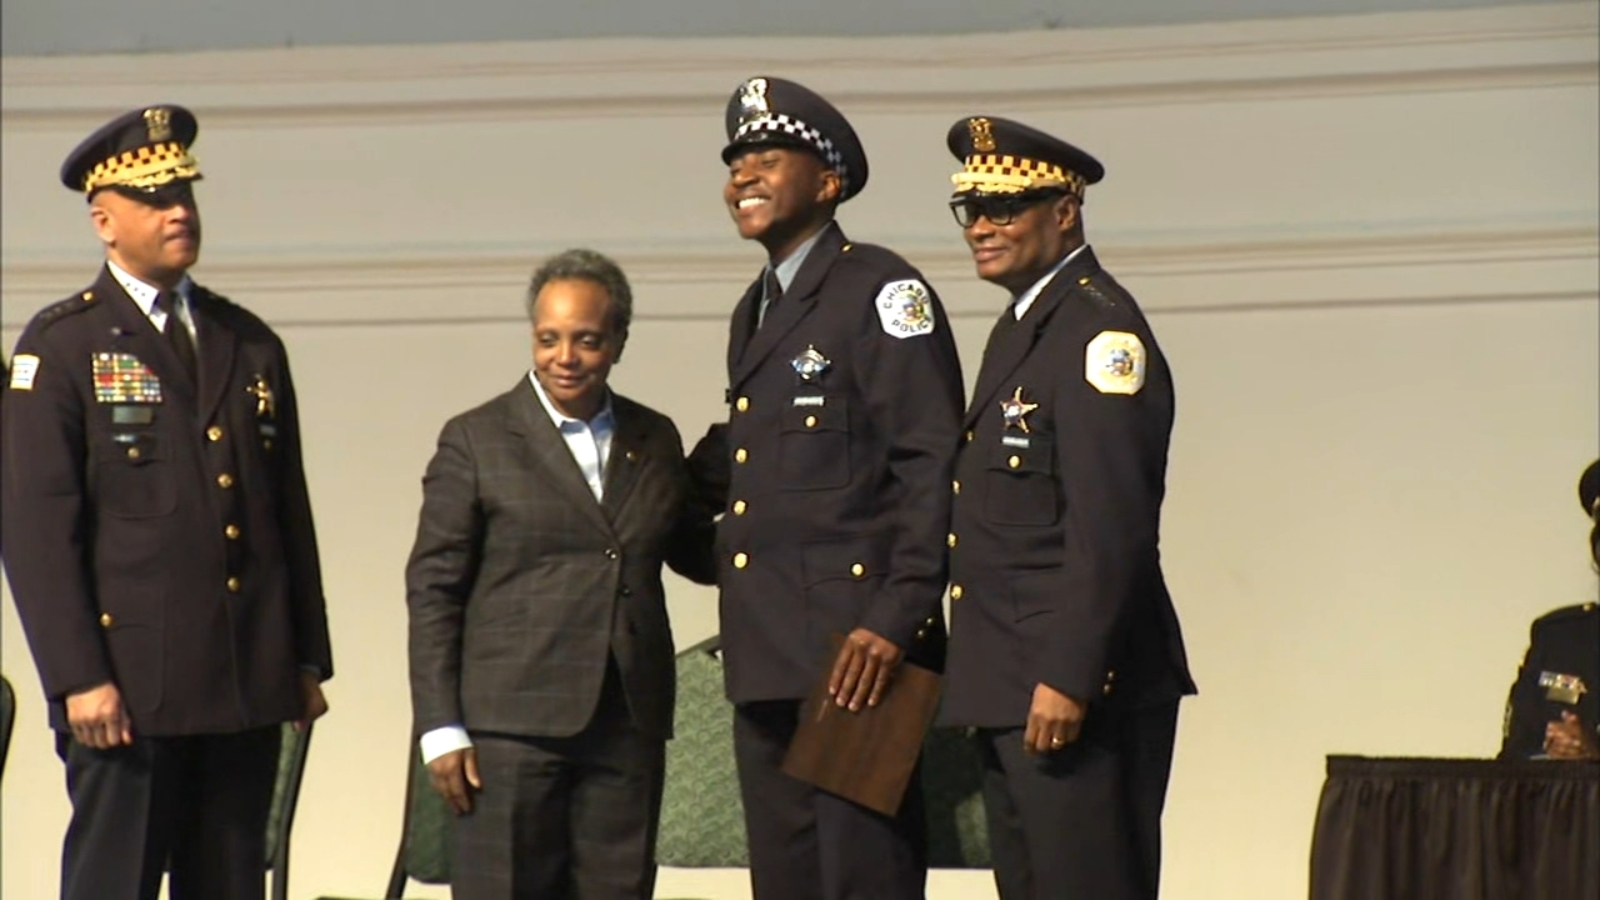 Chicago Police Department swears in 80 new officers, reflecting diversity efforts